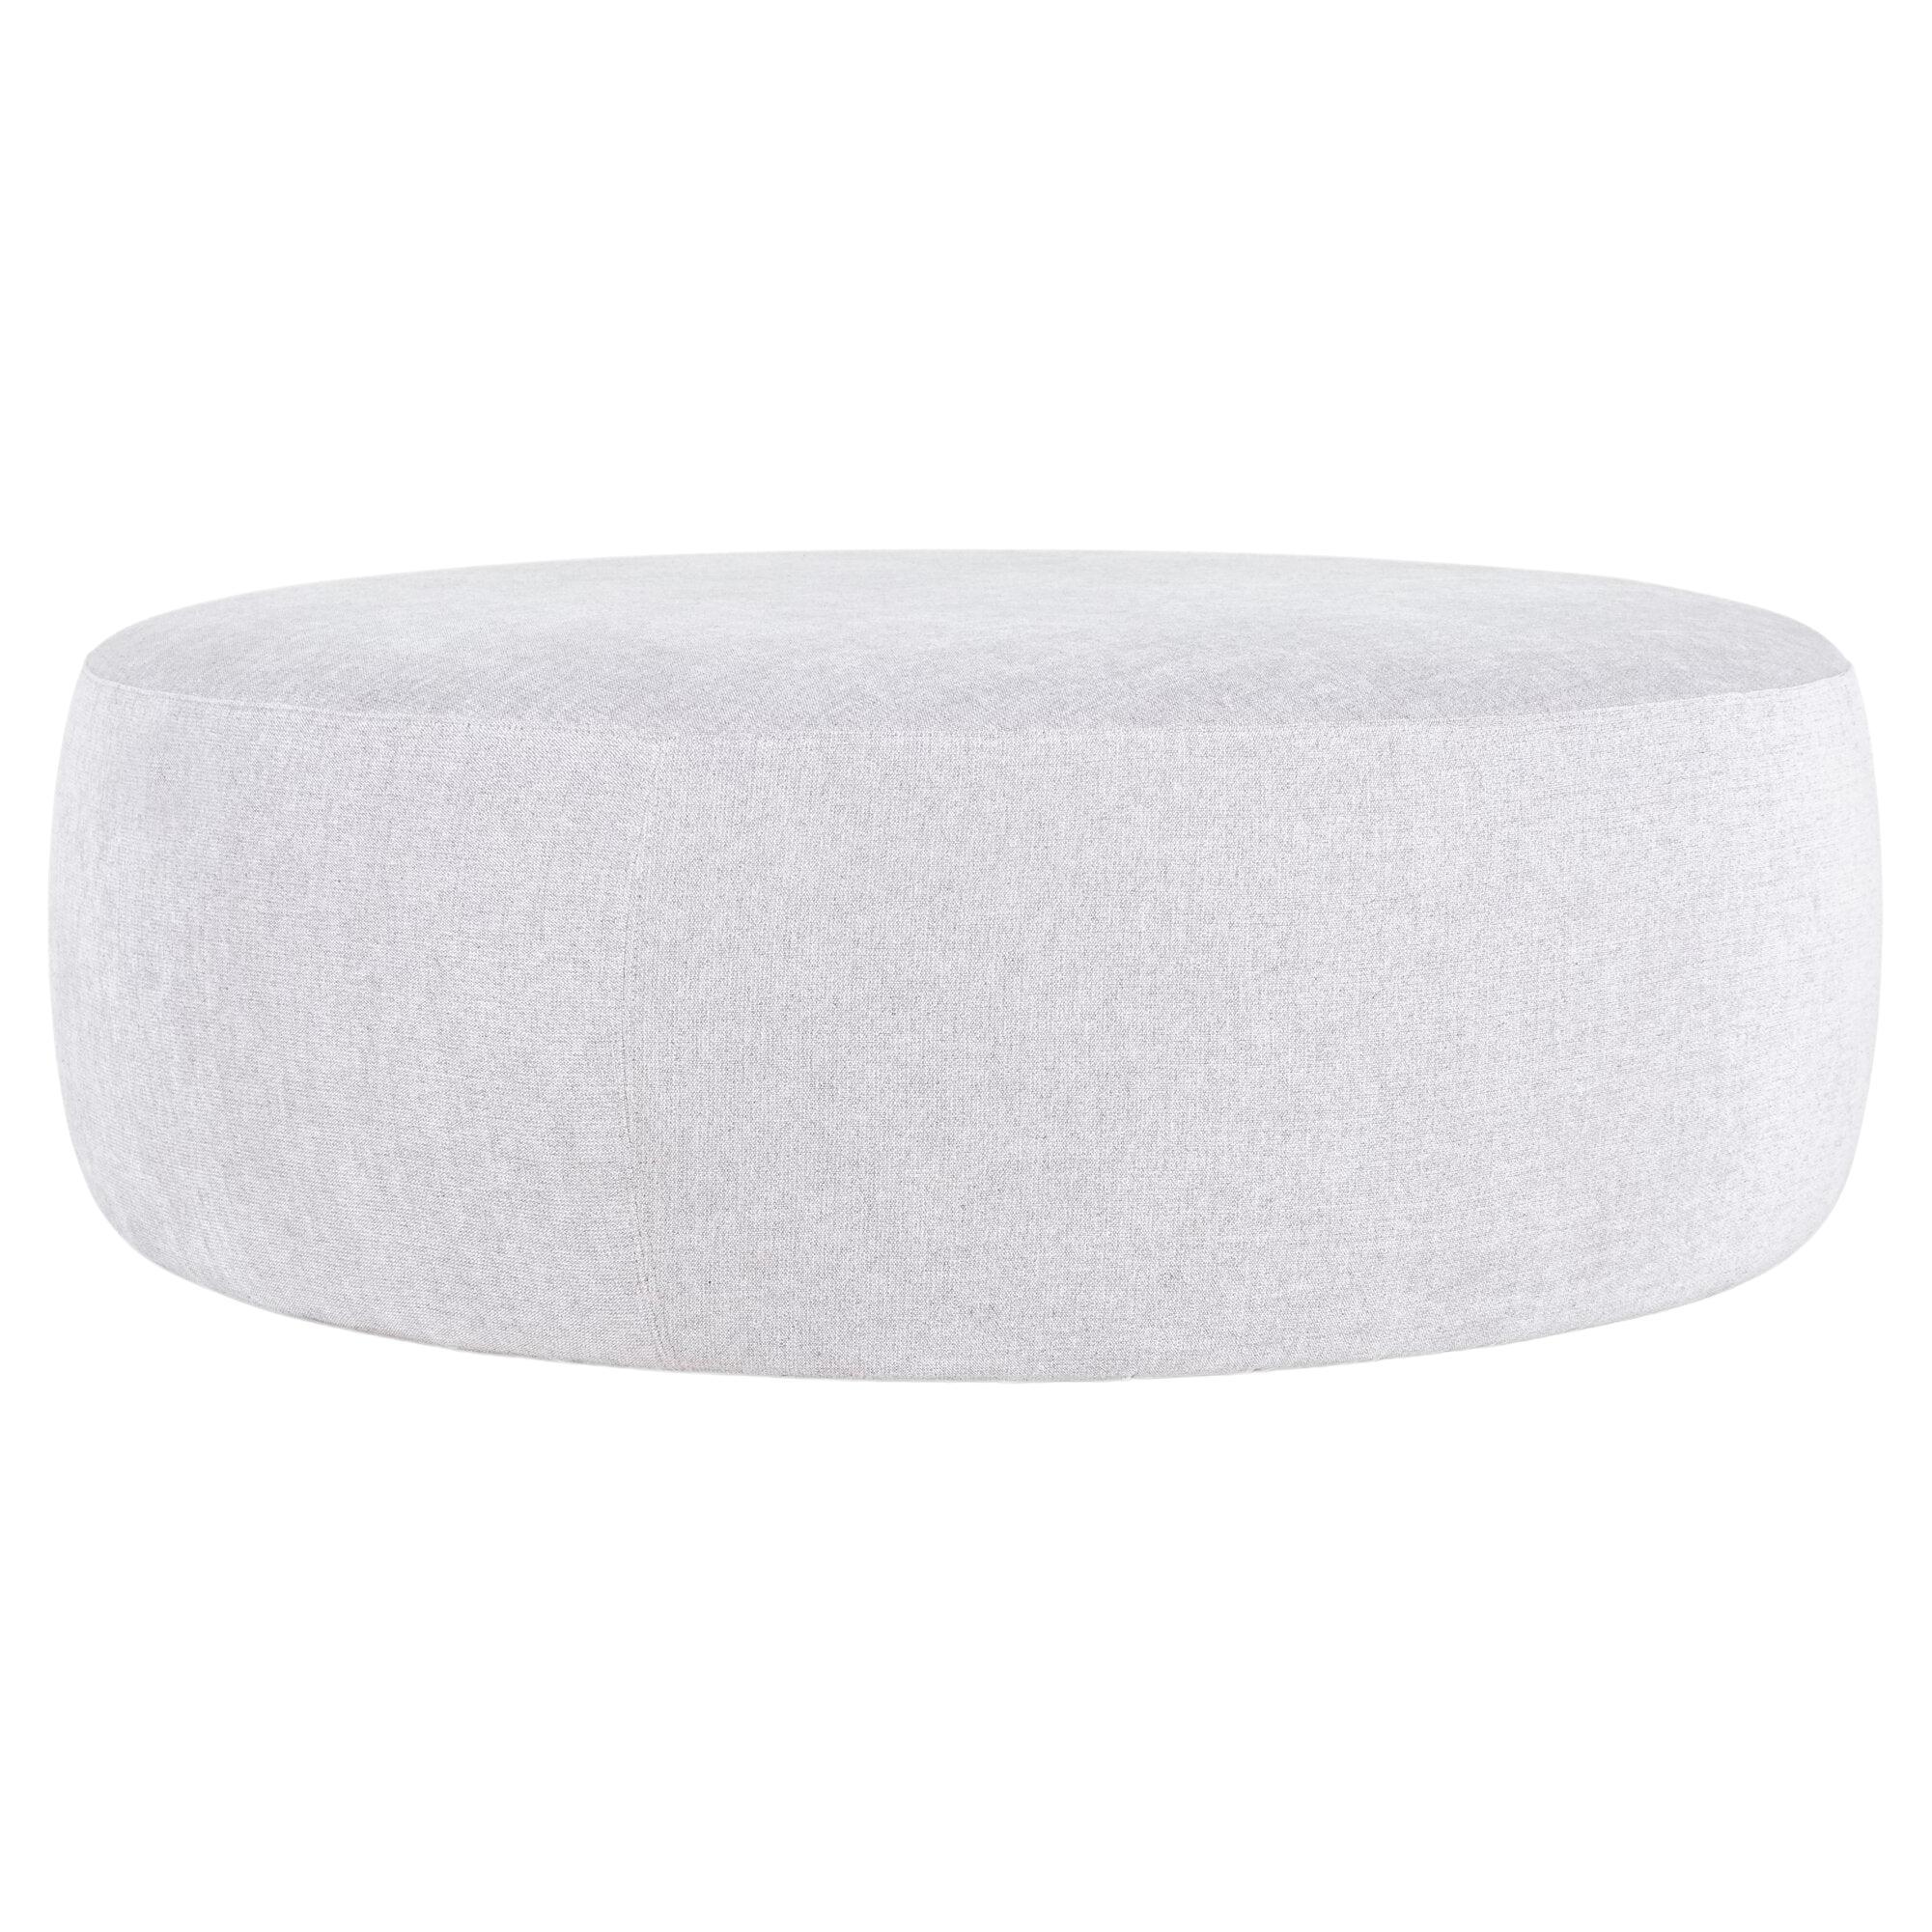 Moooi Pooof Large Pouf in Tonica 2, 171 White Upholstery